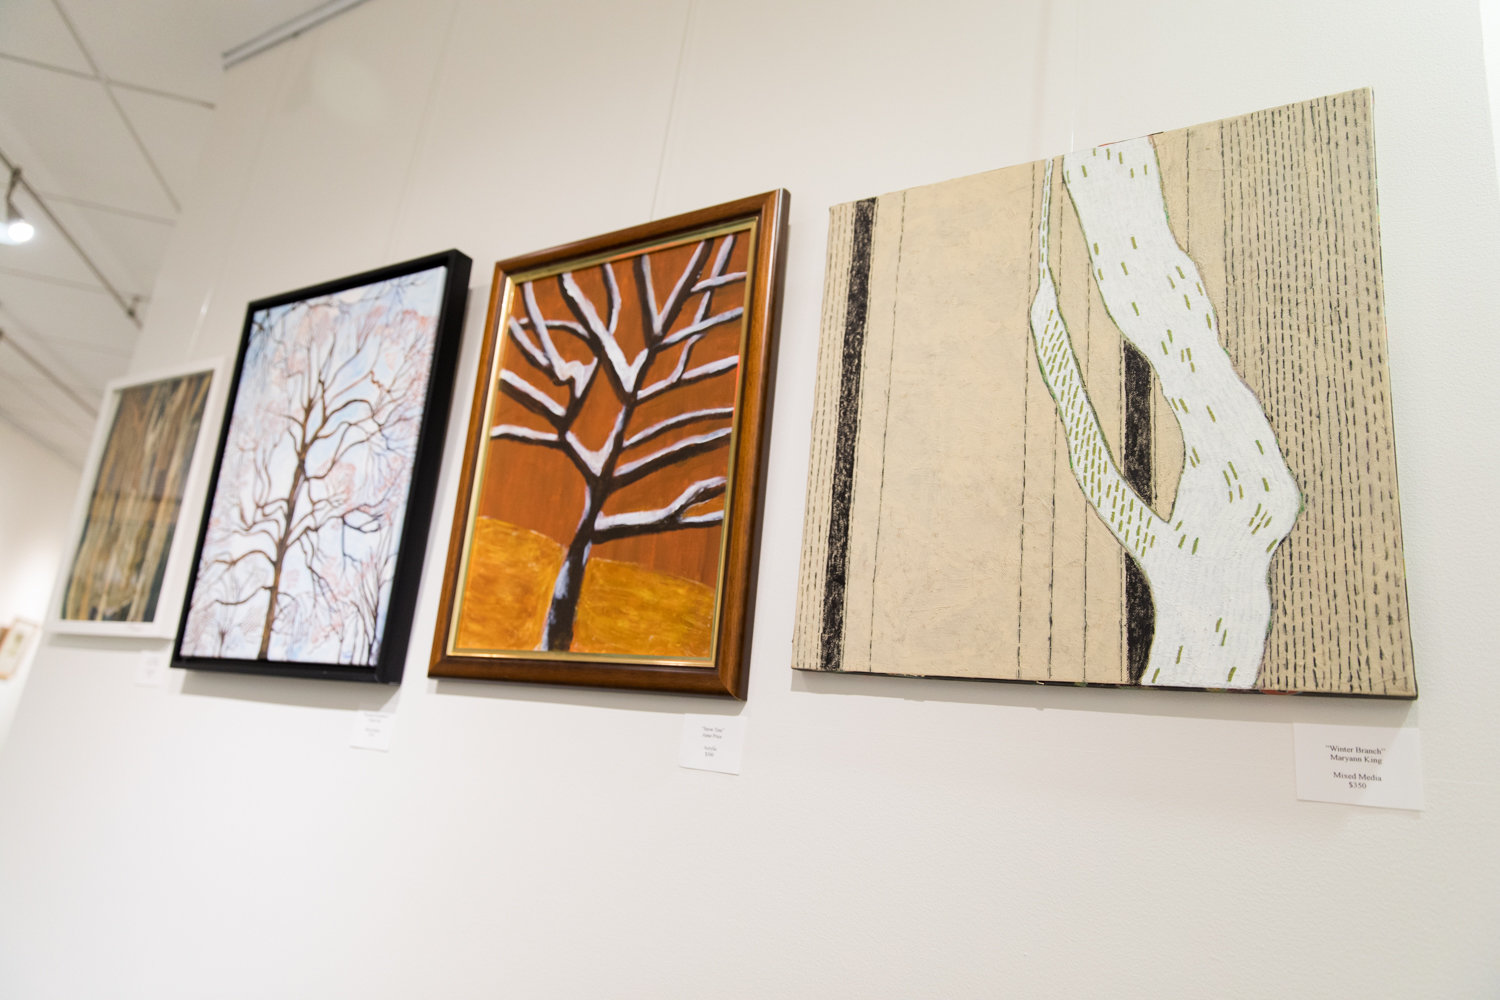 The Riverdale Y’s Gallery 18 space went full arboreal with its latest exhibition ‘Tree Time,’ which is on display through Nov. 3.